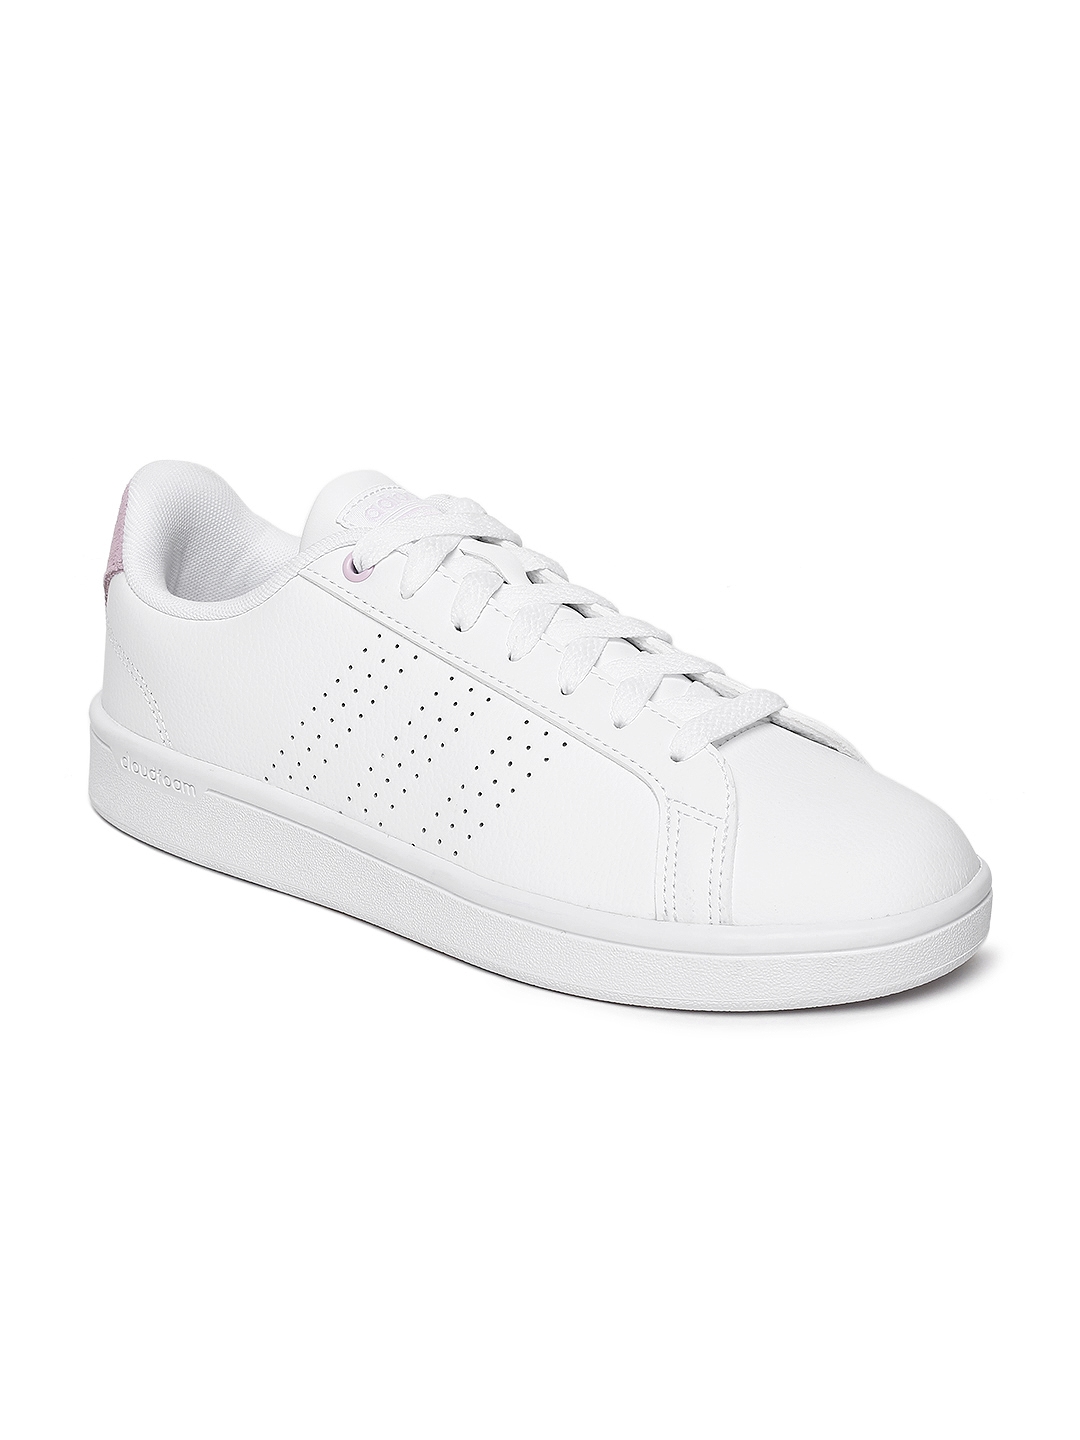 Buy Adidas Women White Perforated CF CL Leather Casual Shoes for Women 8255131 | Myntra